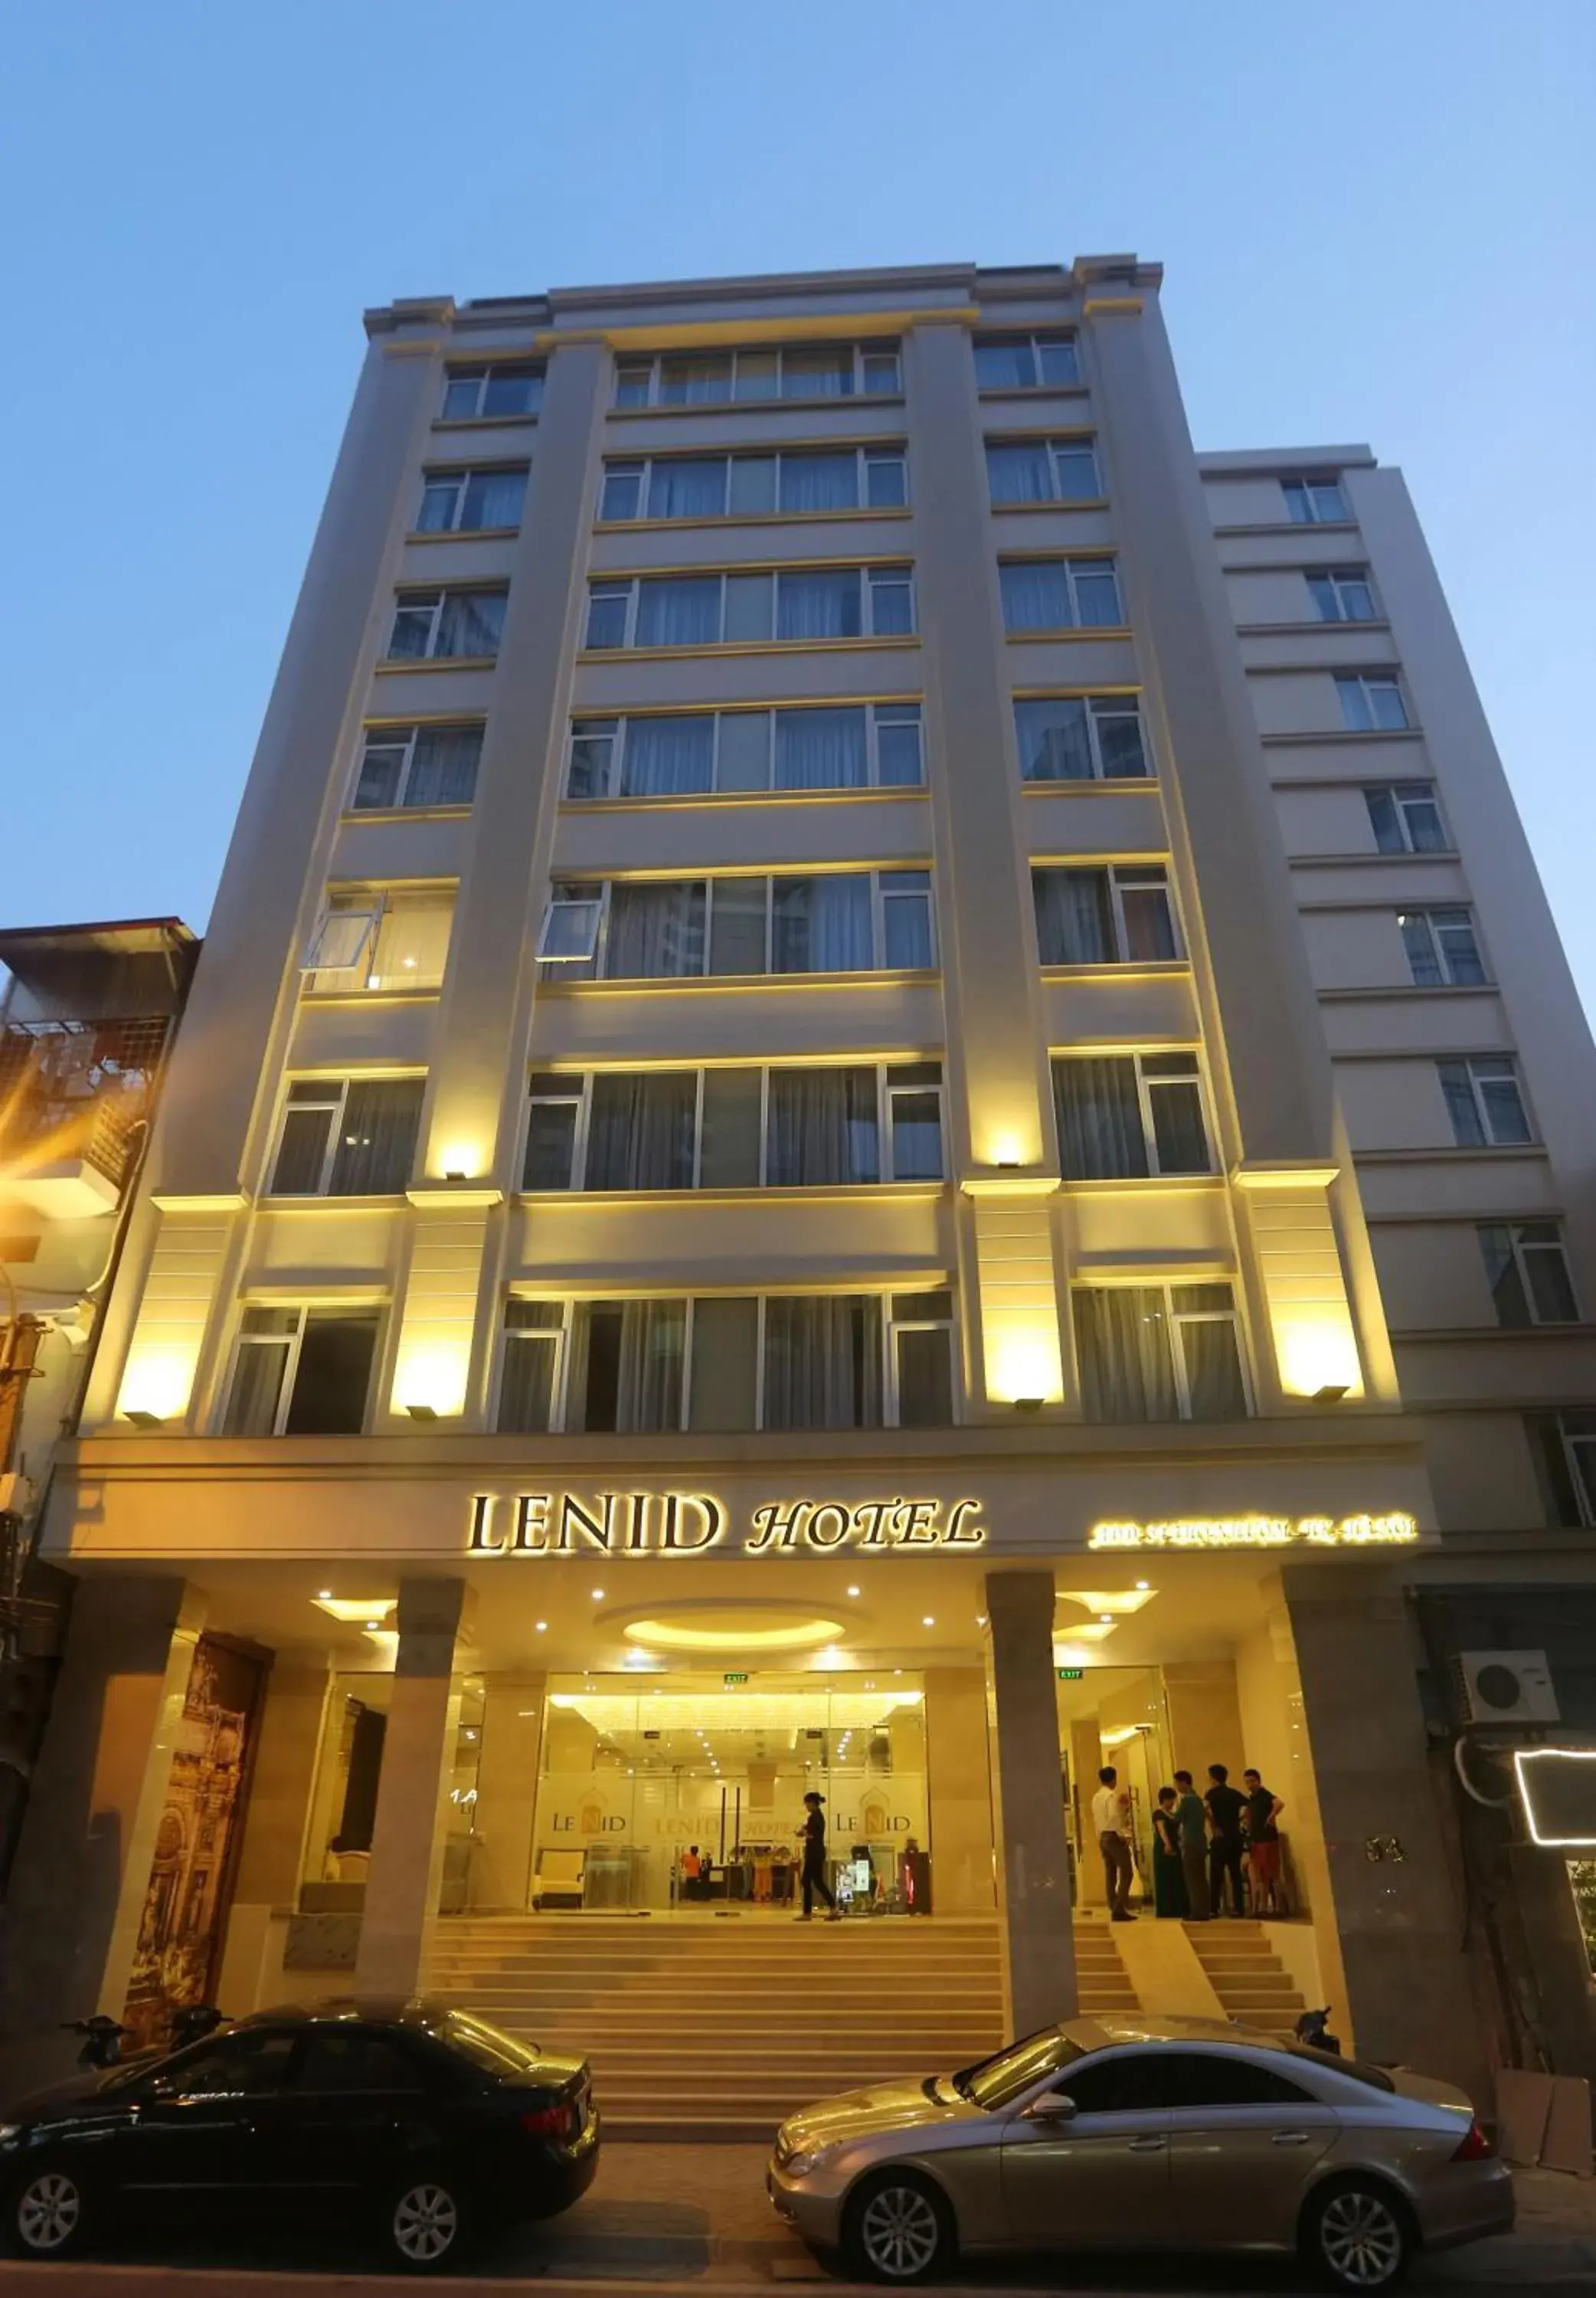 Property Building in Lenid Hotel Tho Nhuom